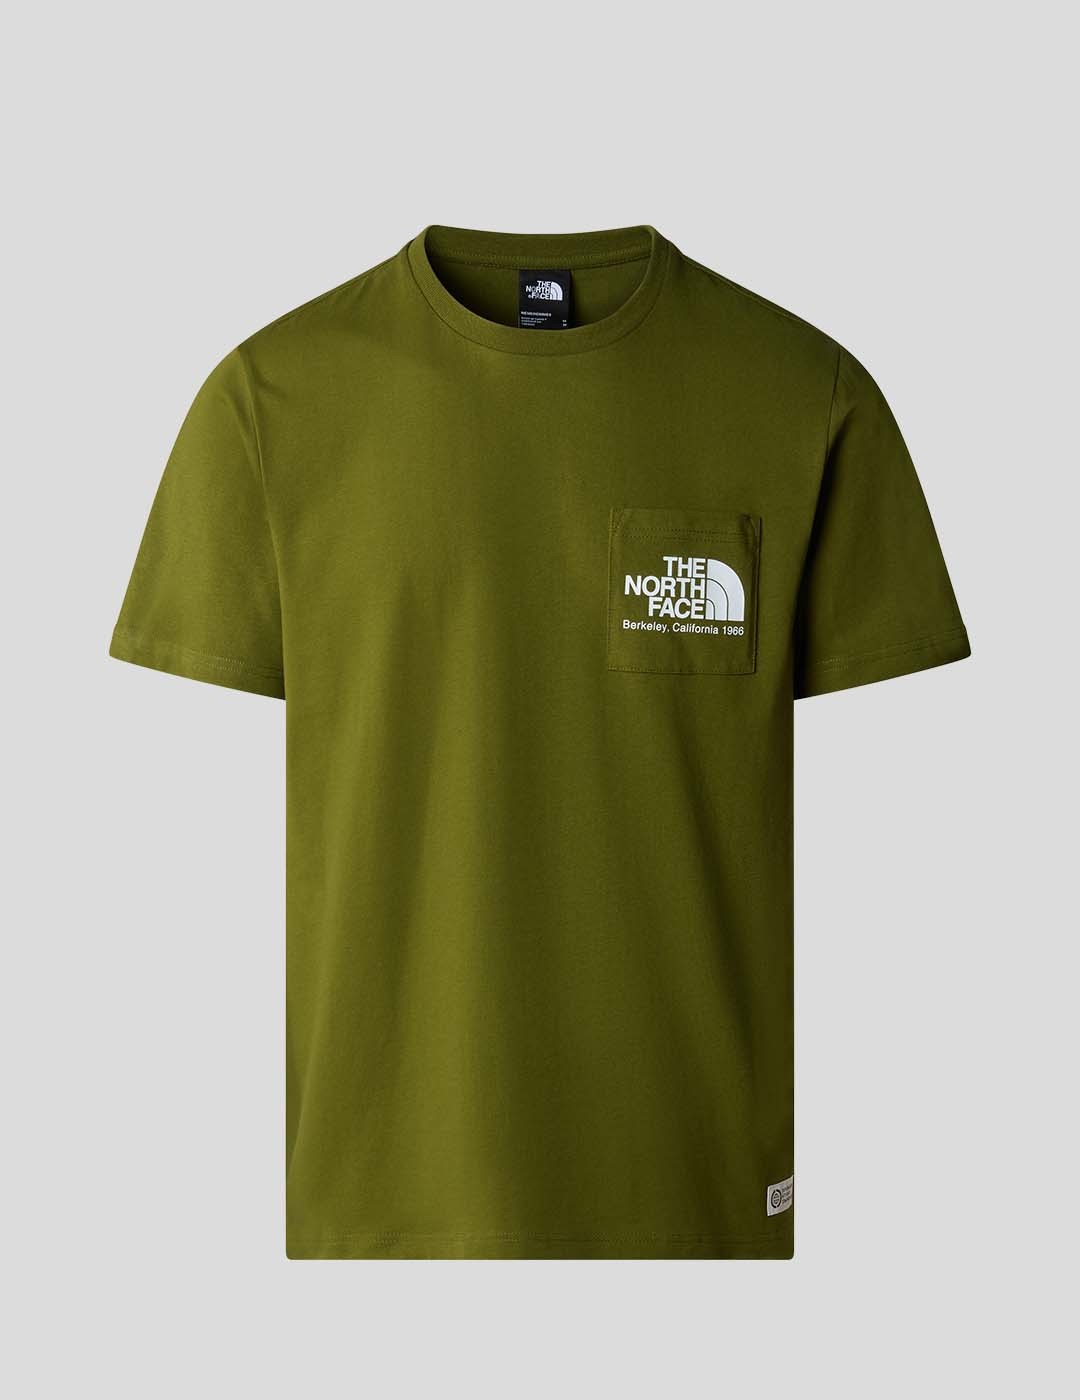 CAMISETA THE NORTH FACE BERKELEY CALIFORNIA POCKET TEE  FOREST OLIVE